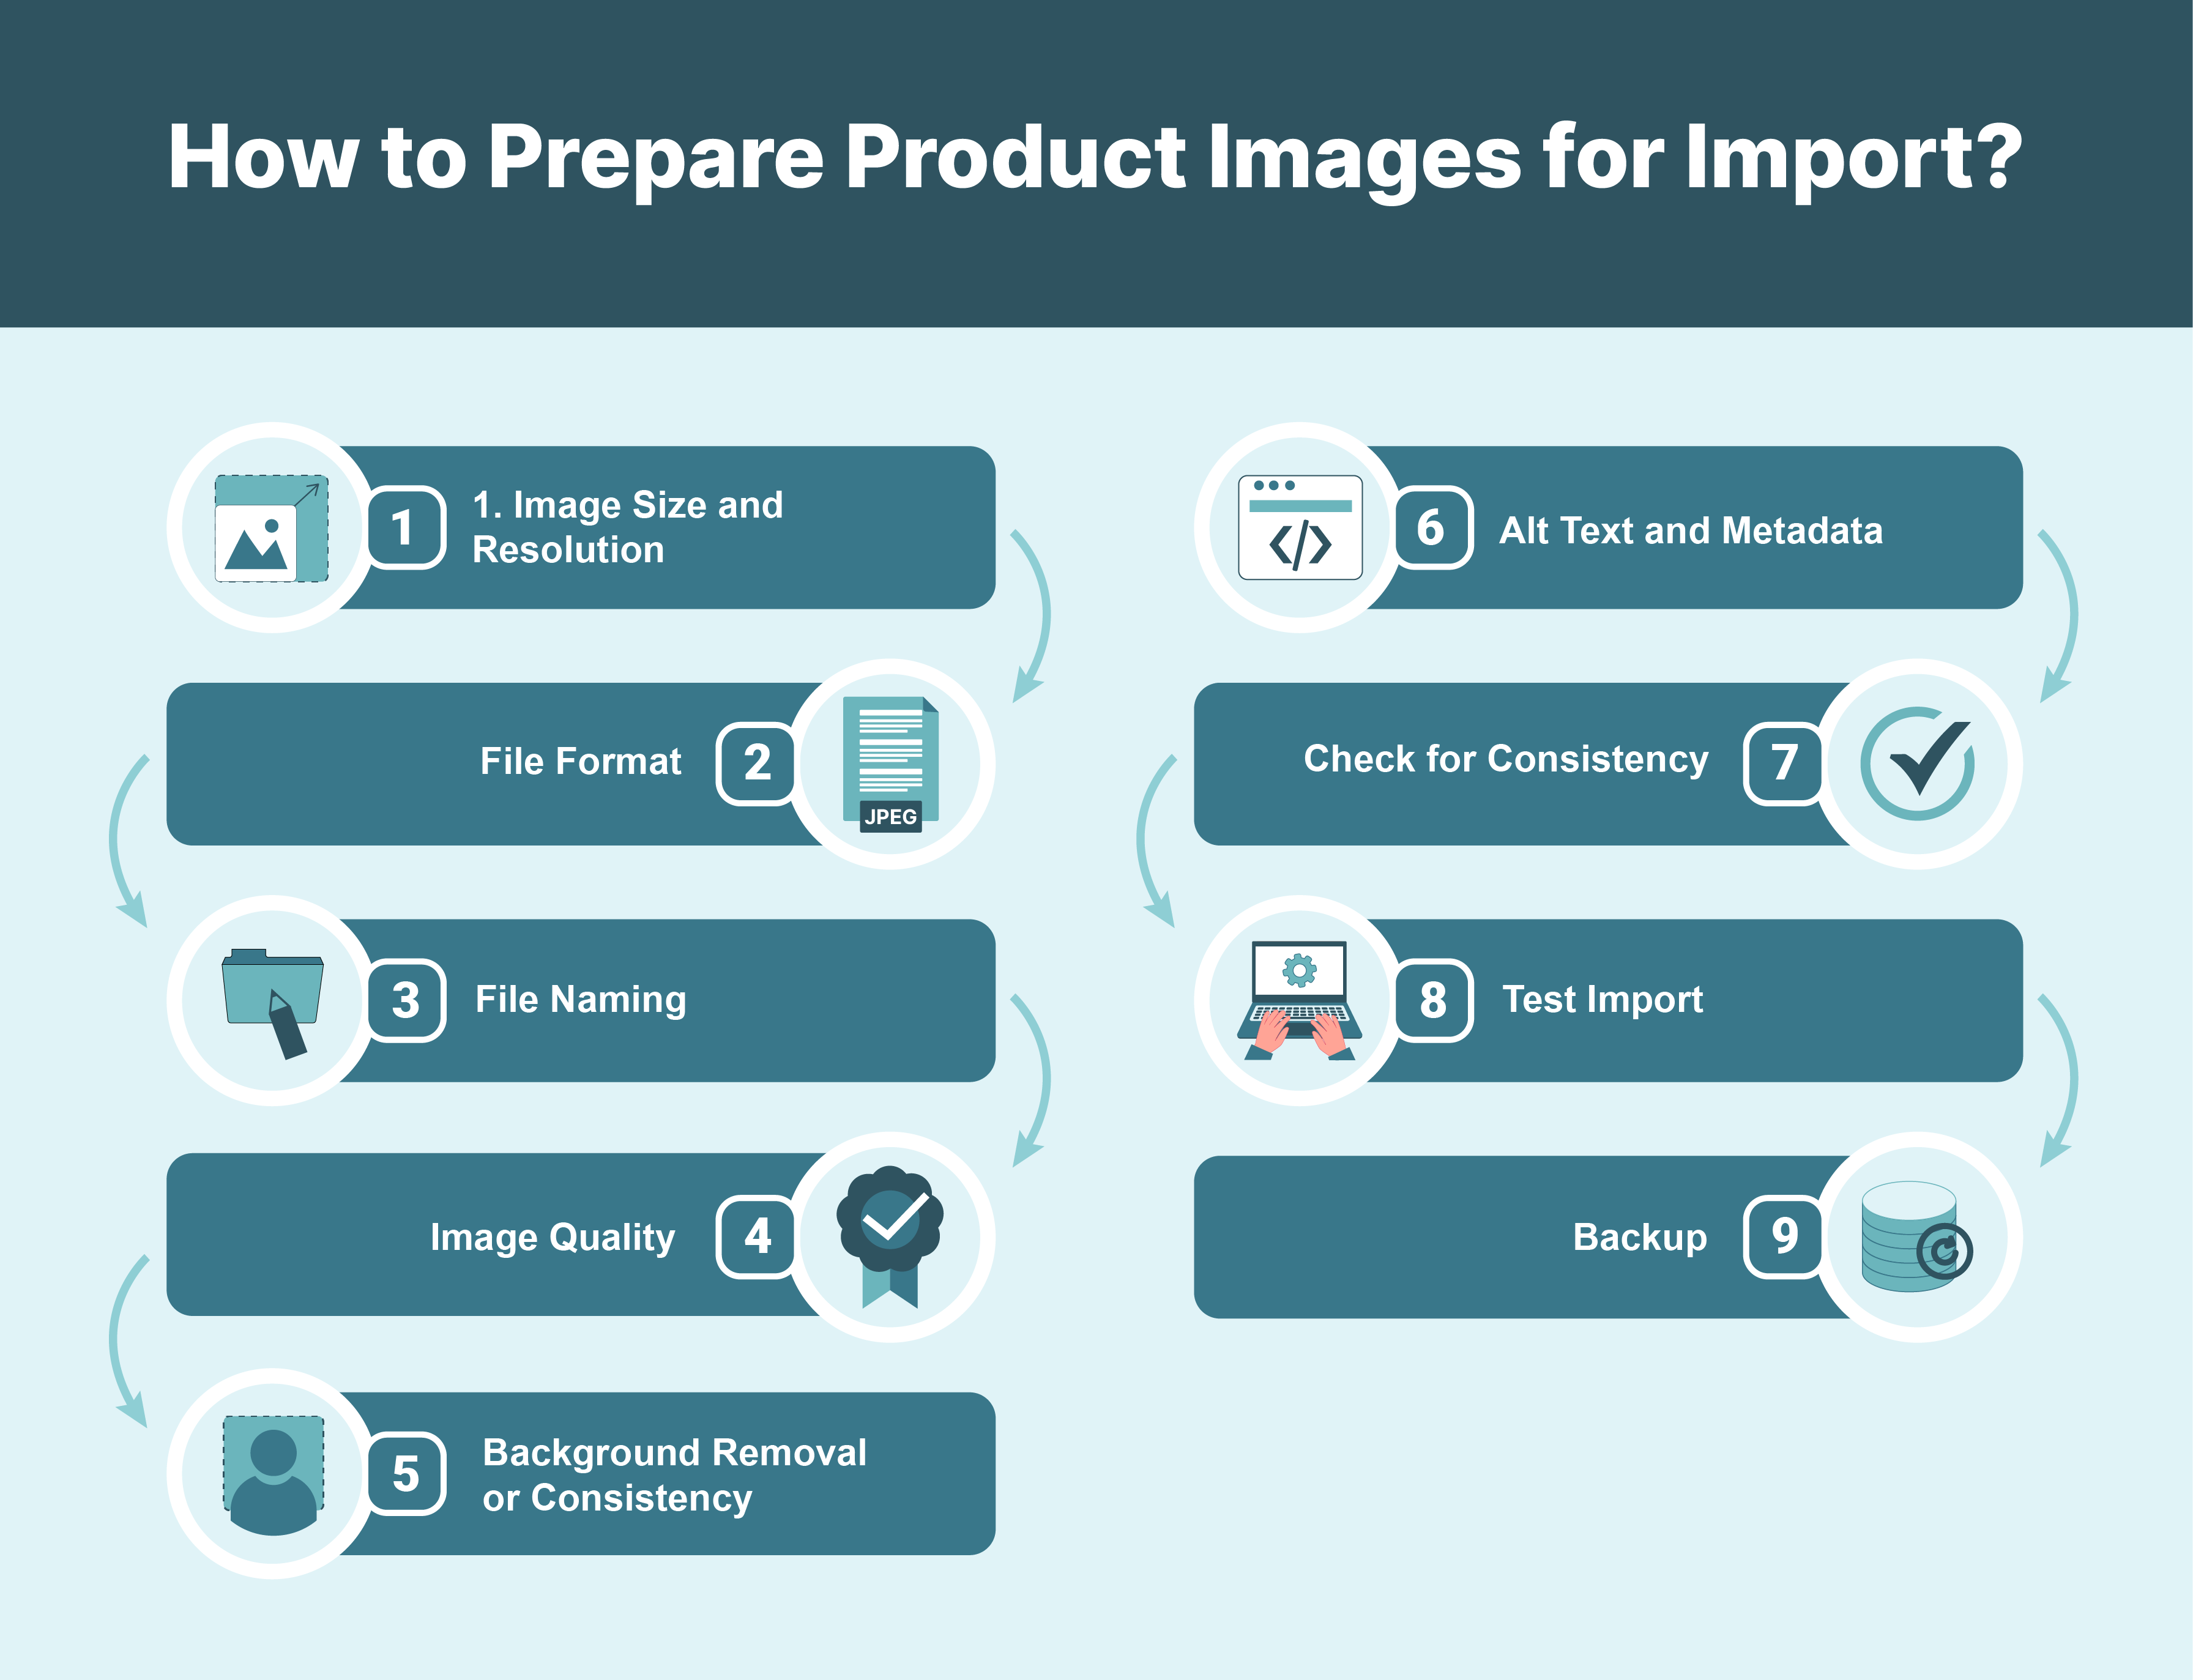 How to Prepare Product Images for Import?